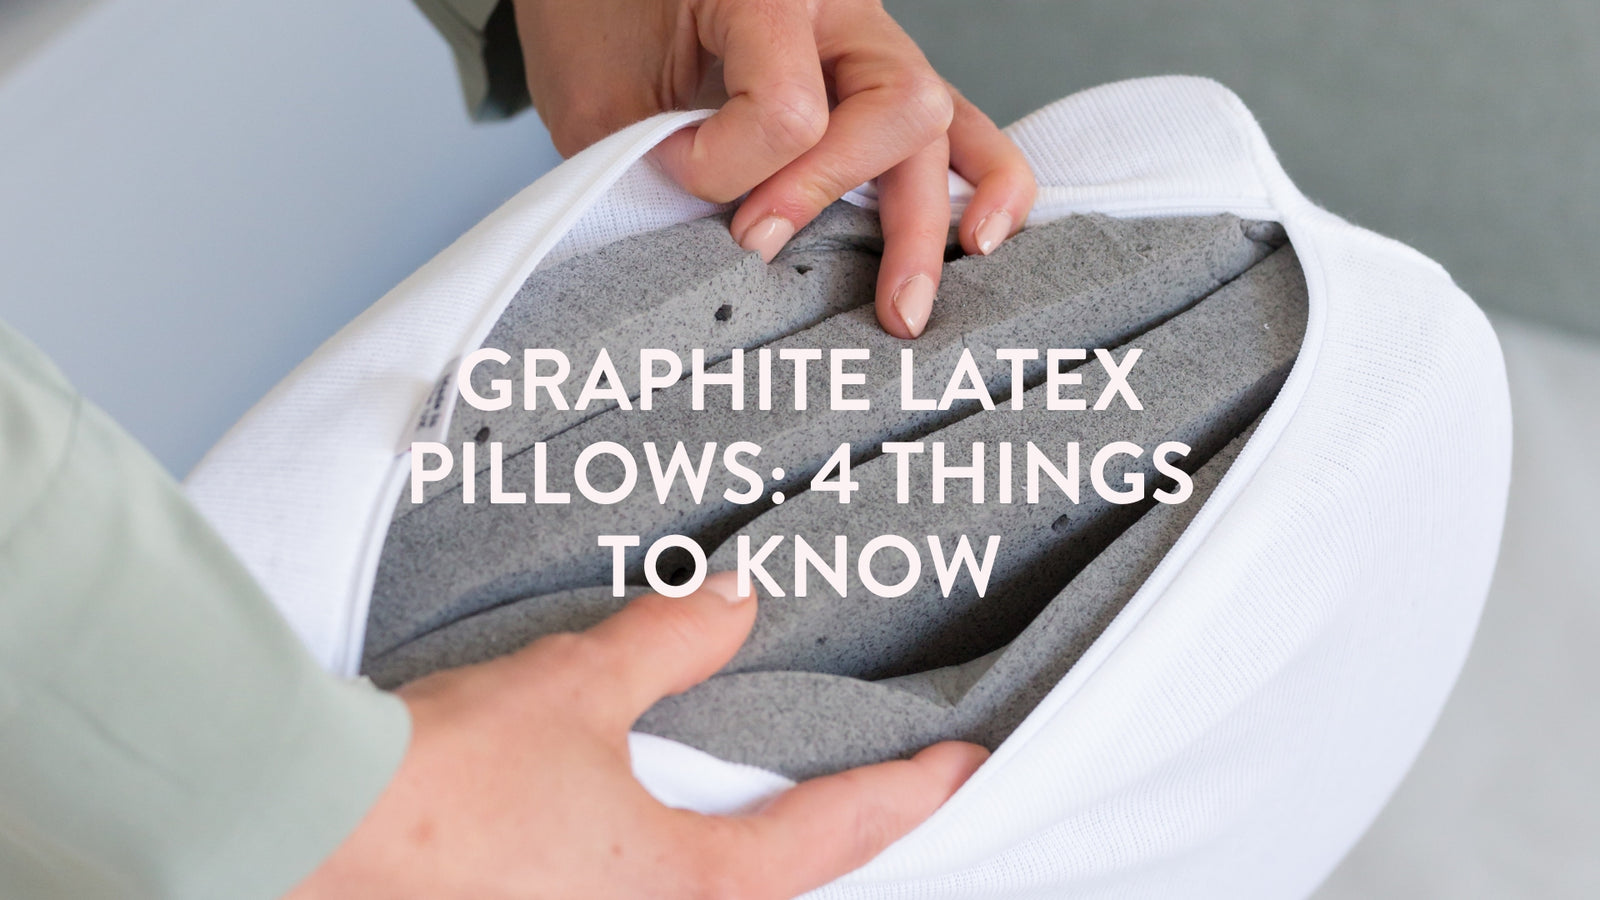 Graphite latex pillows: 4 things to know